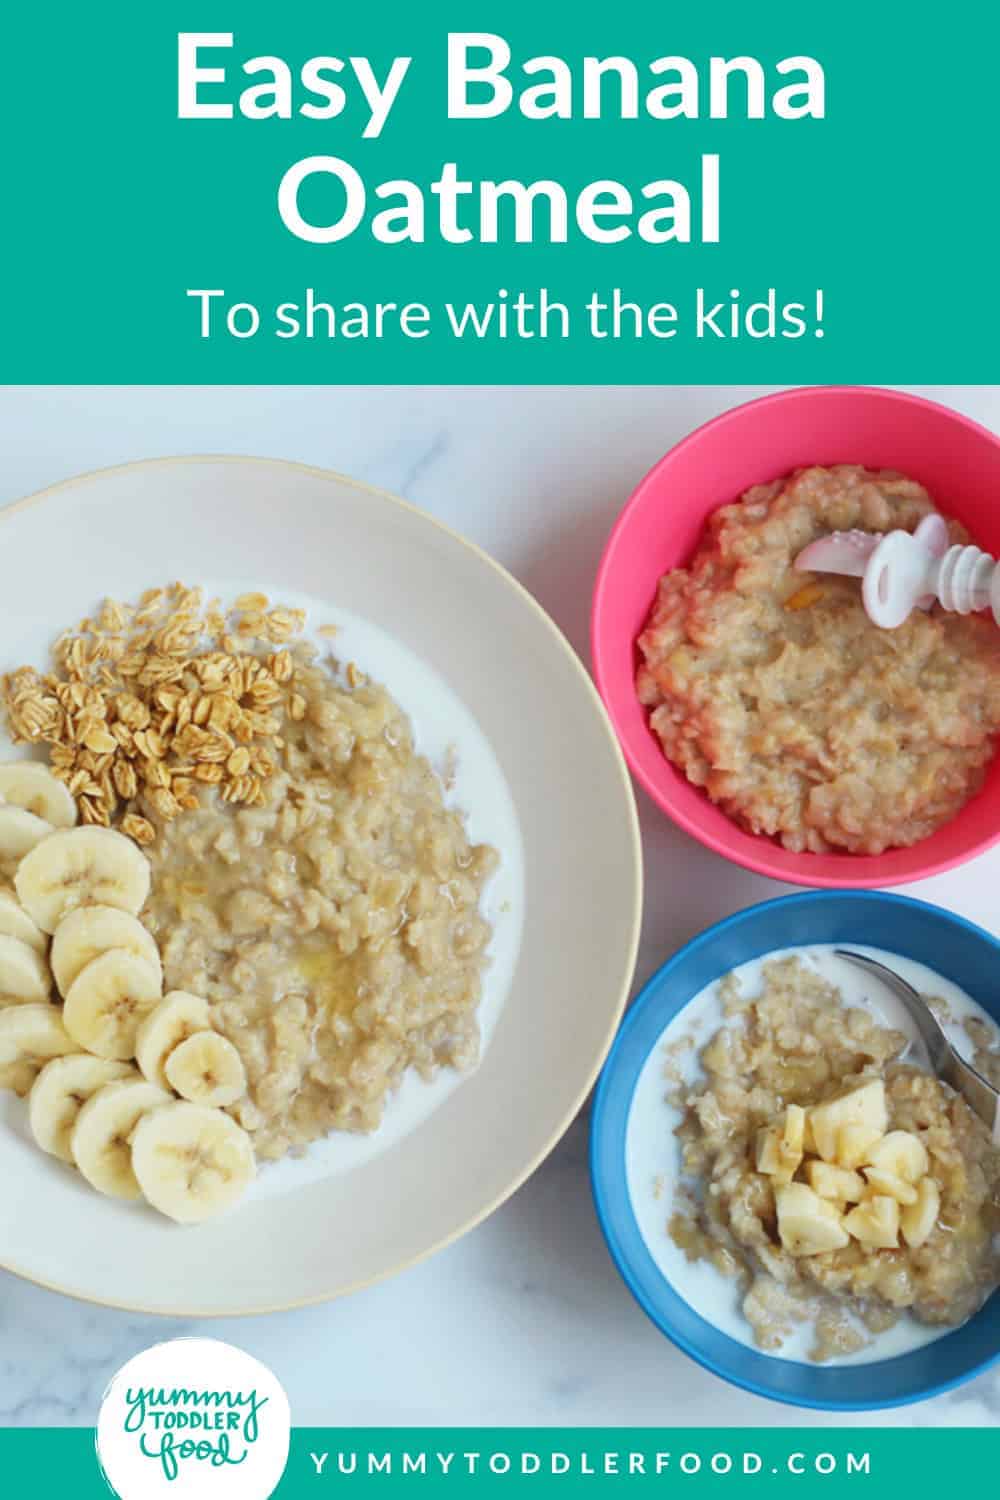 Easy Banana Bread Oatmeal (to Share with the Kids) - Product4kids